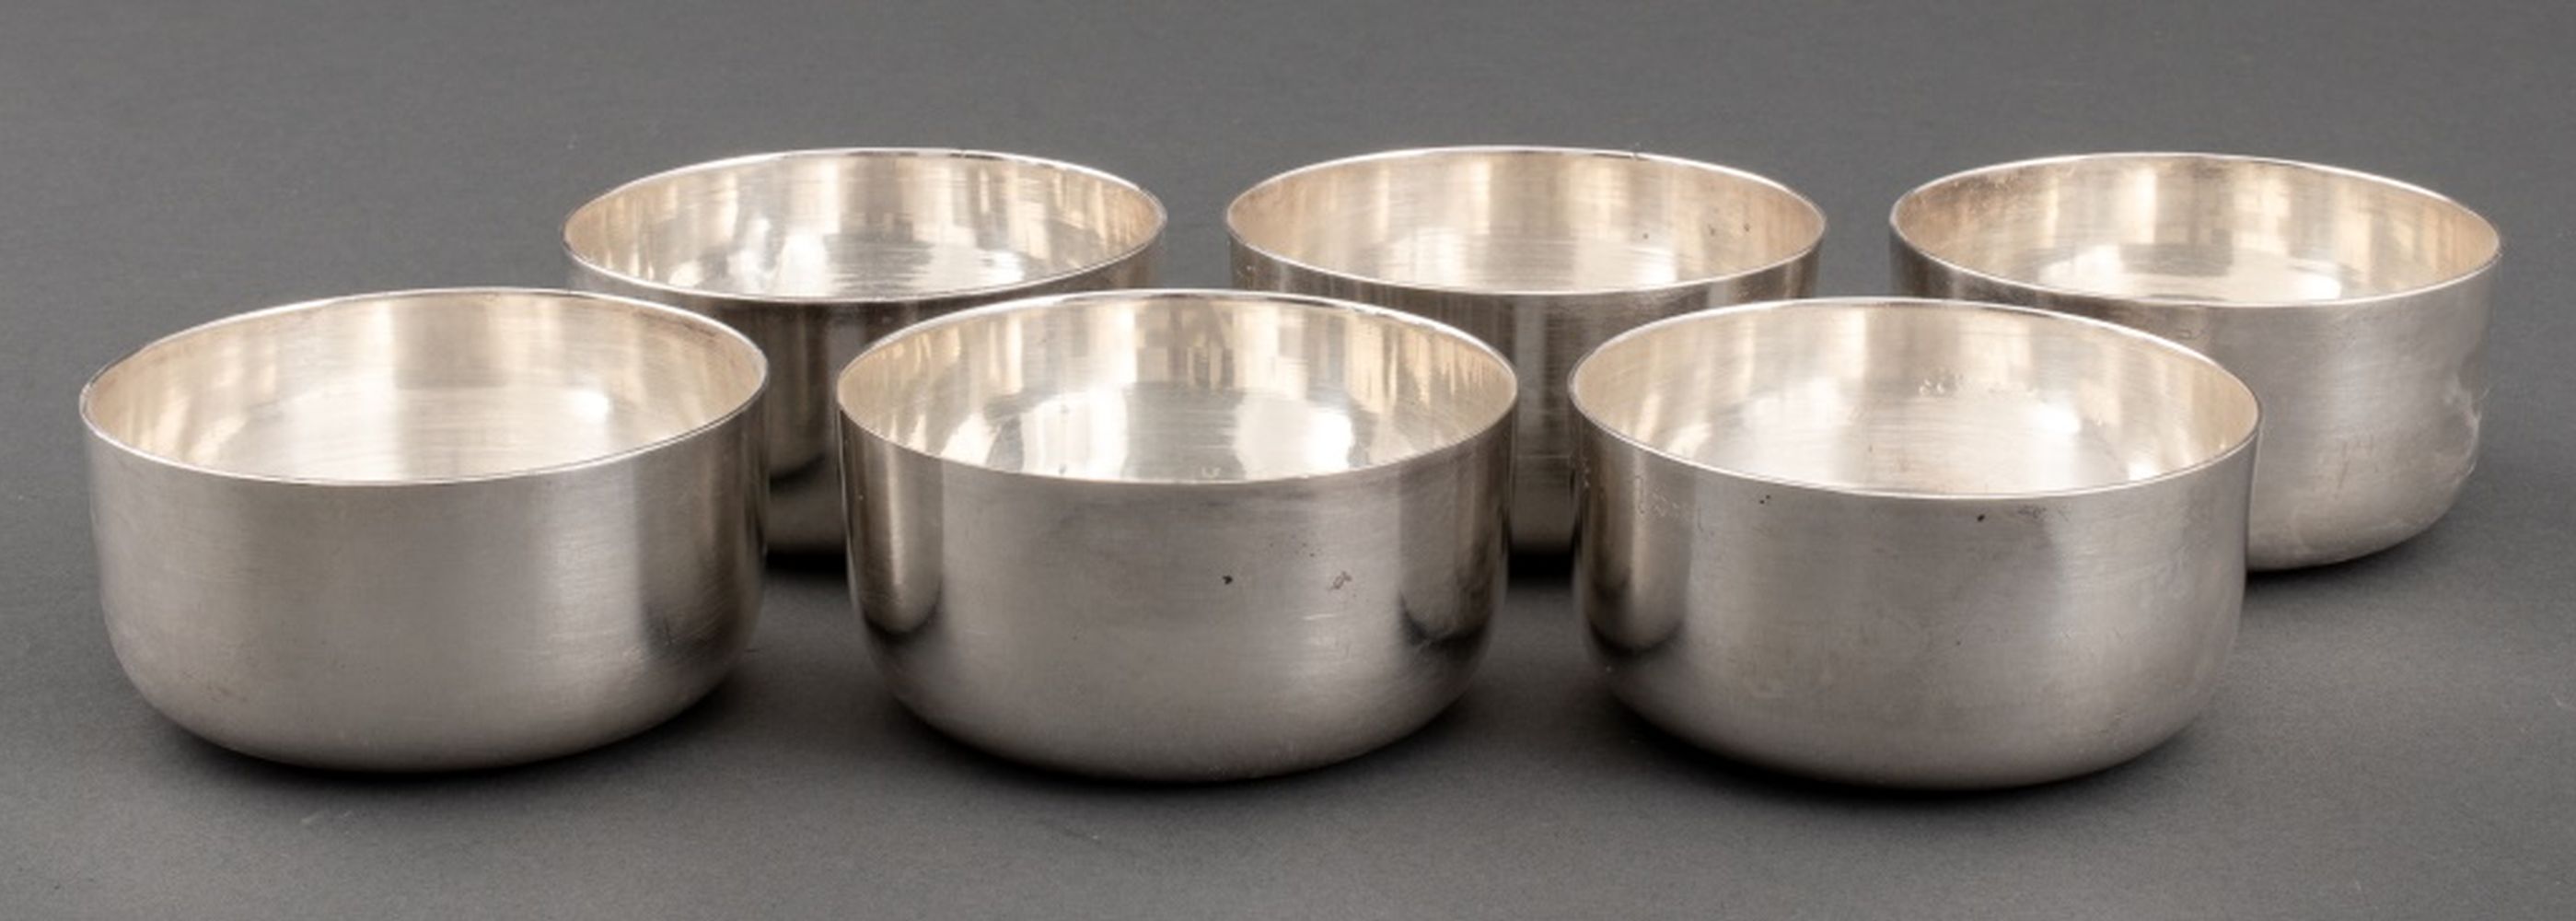 INDIAN SILVER RICE BOWLS 6 Group 3600dc